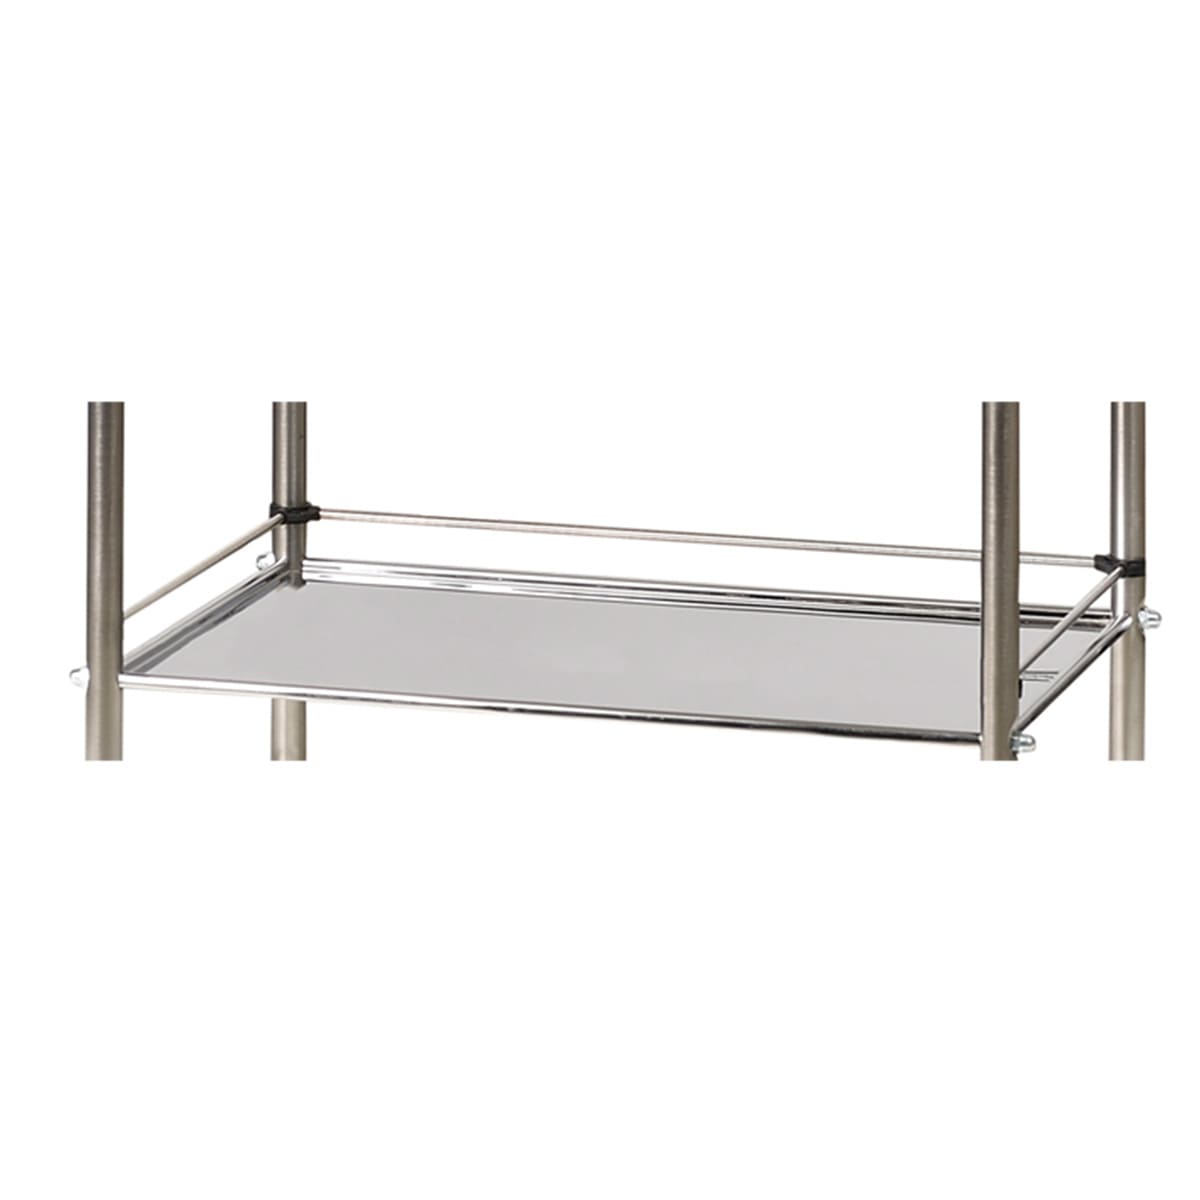 Set of 3 stainless steel guard rails for tray 70x50cm